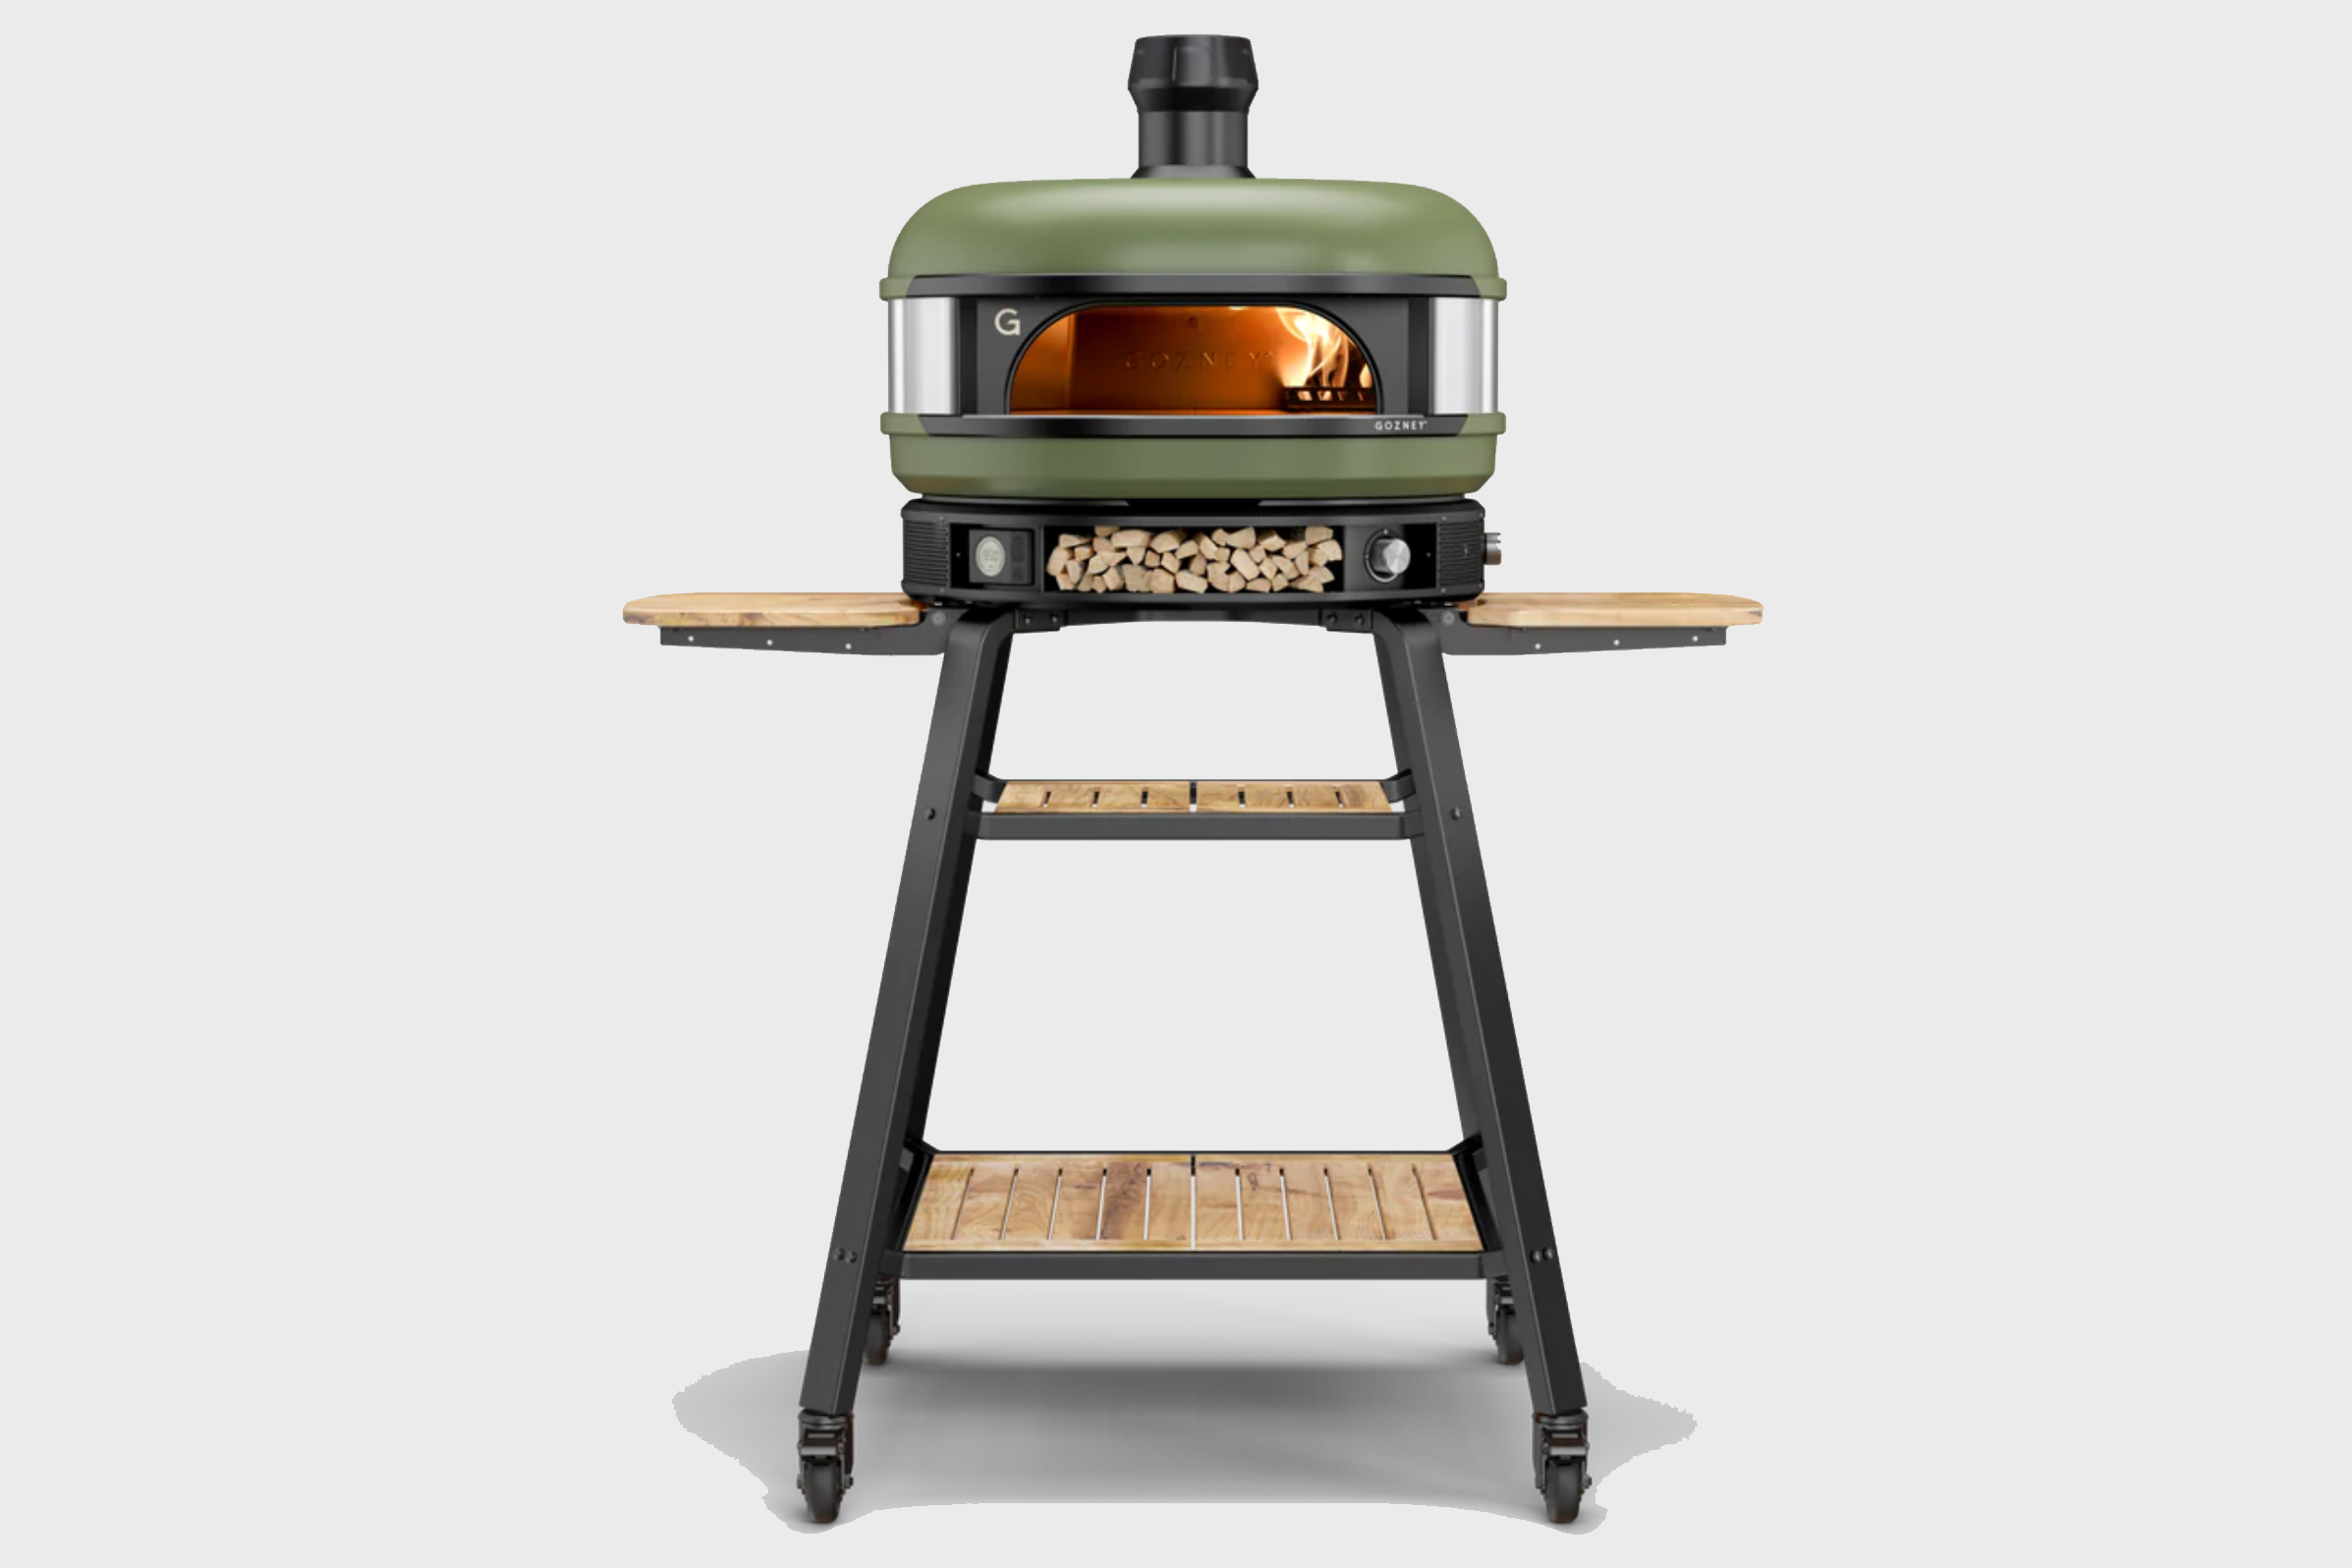 Gozney wood fired gas pizza oven with stand